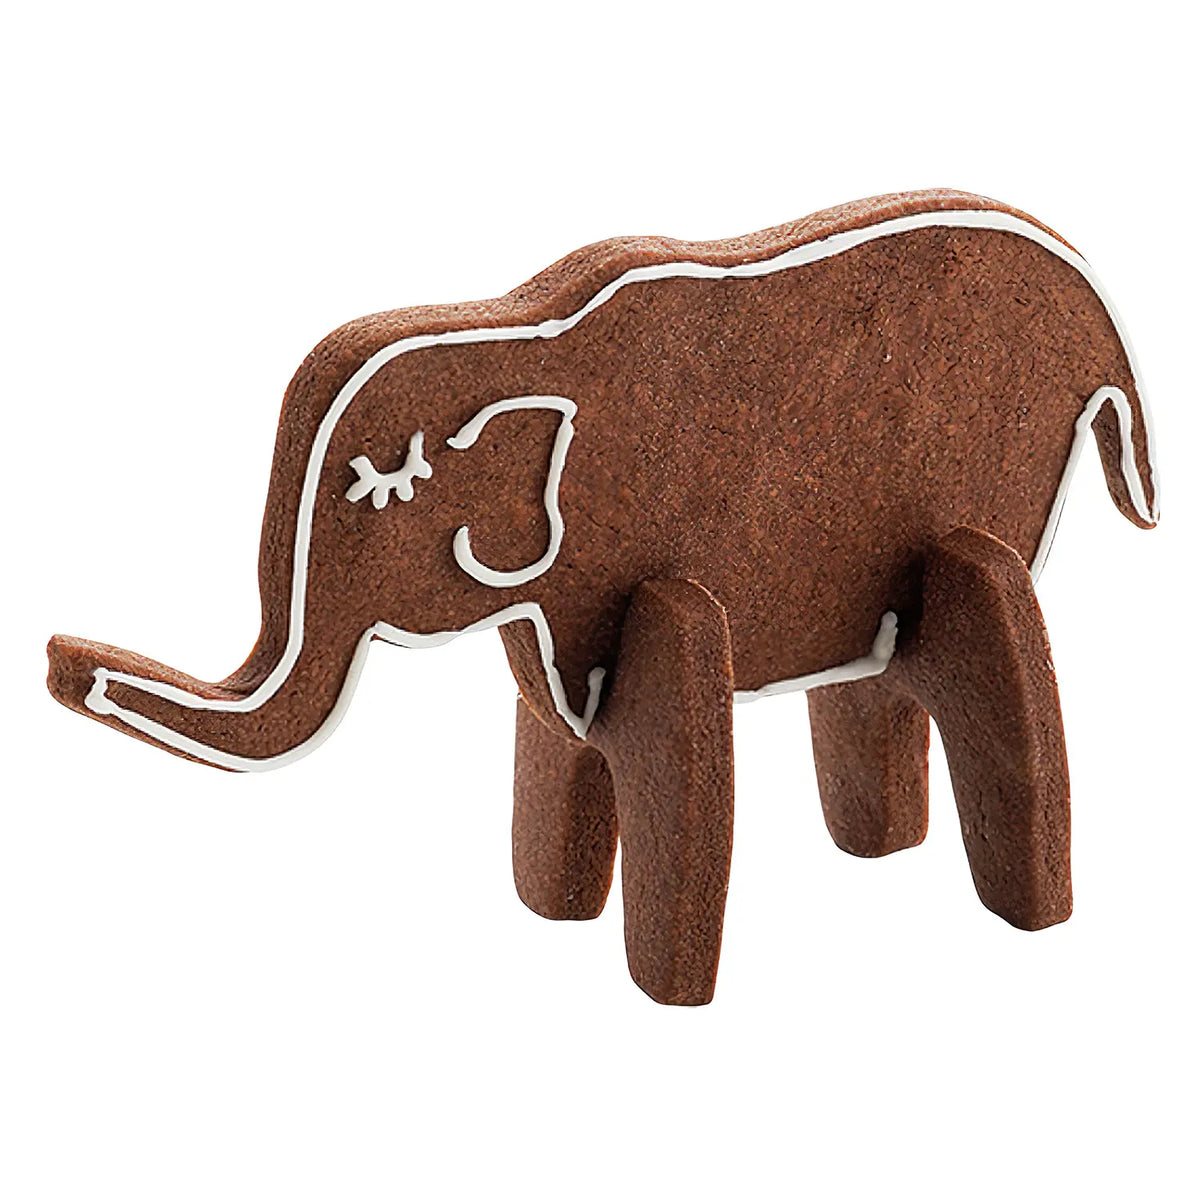 TIGERCROWN Cake Land Stainless Steel Cookie Cutter 3D Elephant